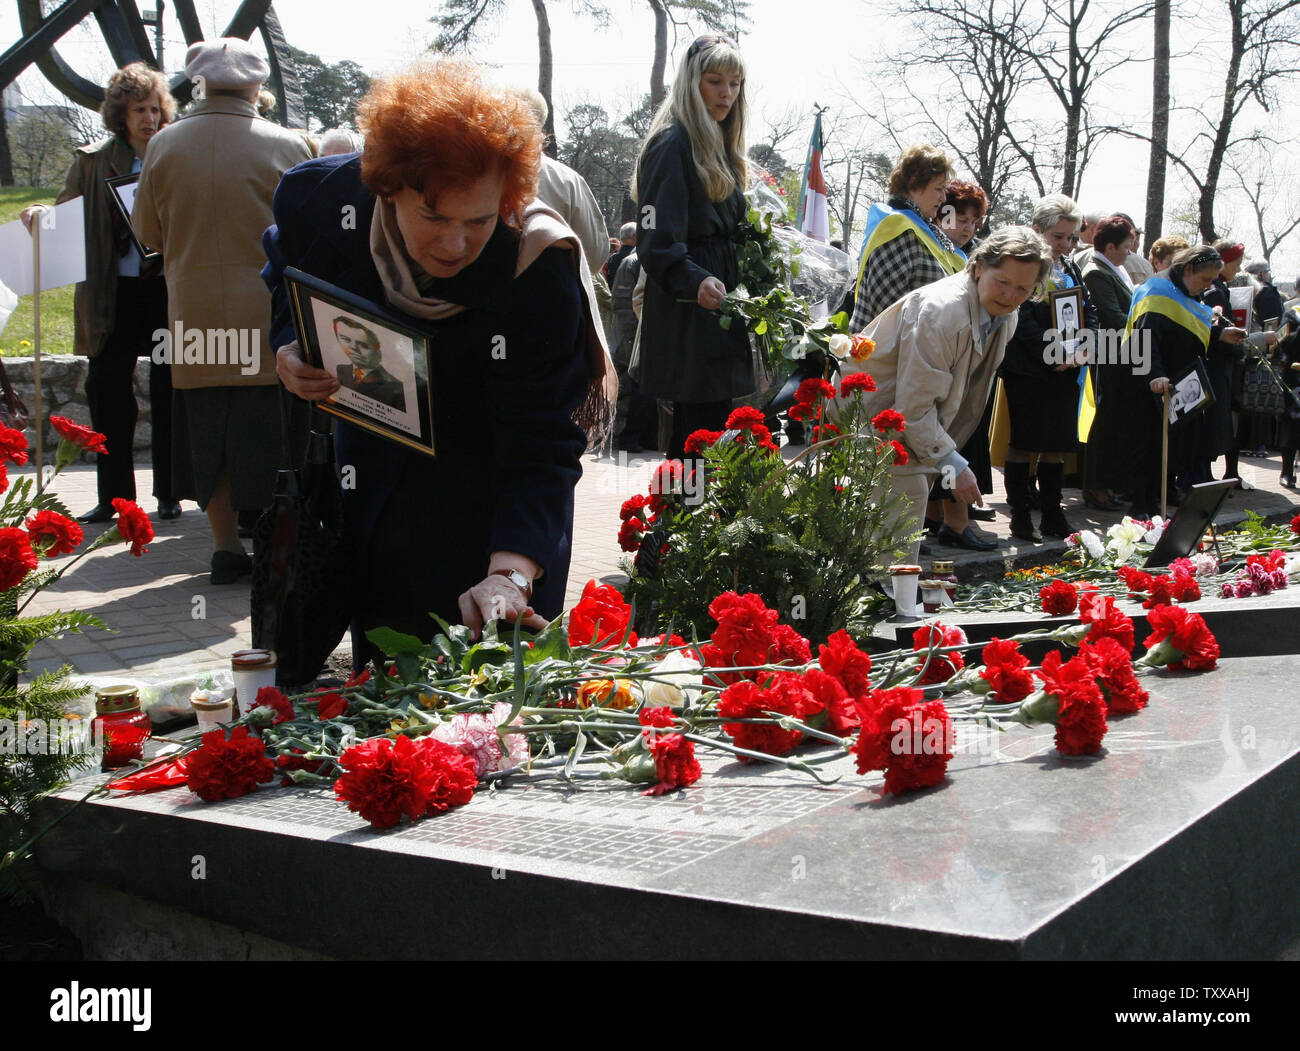 People place flowers at the memorial to Chernobyl victims in Kiev on April 26, 2007. Ukraine marks the 21st anniversary of the world's worst civil nuclear tragedy when Chernobyl's reactor No.4 exploded sending radioactive clouds in the air, poisoning vast areas in Ukraine, Belarus and Russia, and contaminating much of Europe. (UPI Photo/Sergey Starostenko) Stock Photo